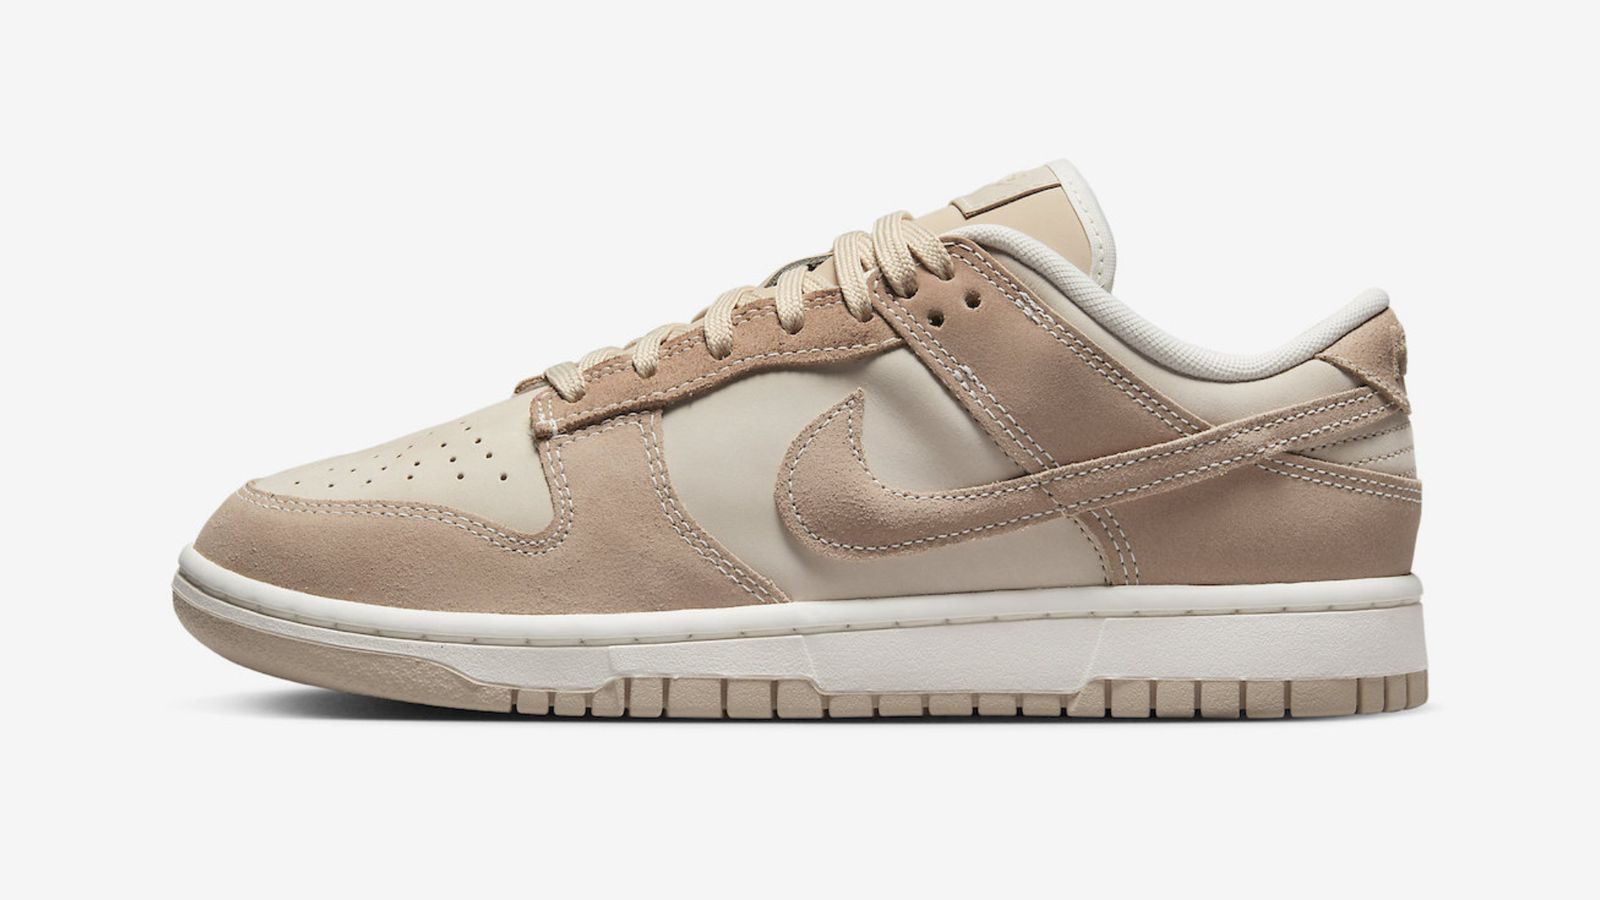 Nike Women's Dunk Low "Sand Drift" product image featuring taupe-coloured leather upper with beige suede overlays accented with contrast stitching and embossed Nike branding. 